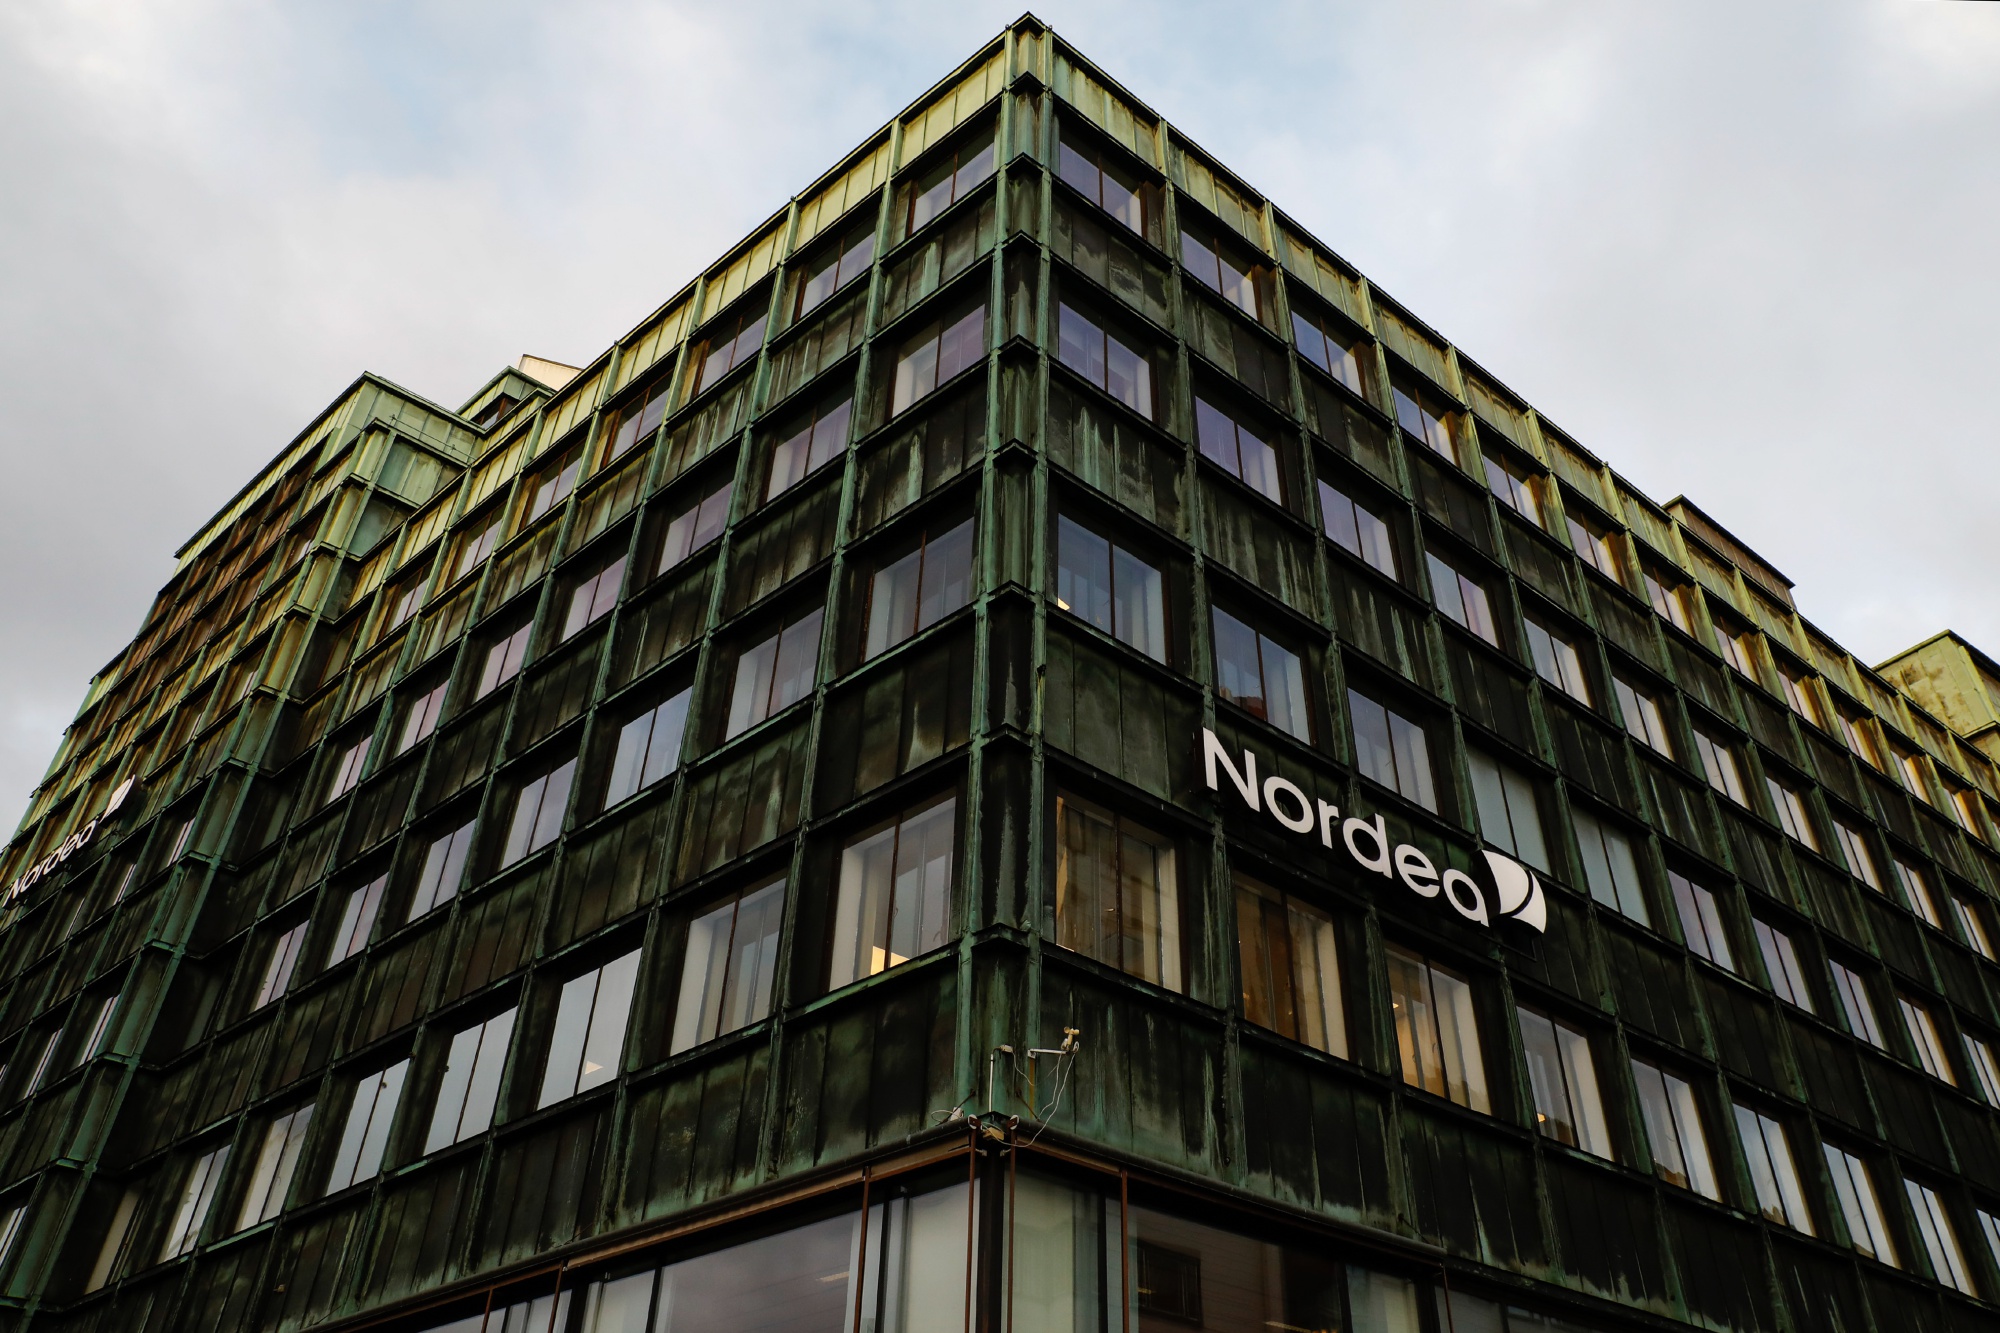 Offices and a bank branch of Nordea Bank Apb stand on Vesterbrogade, Copenhagen.